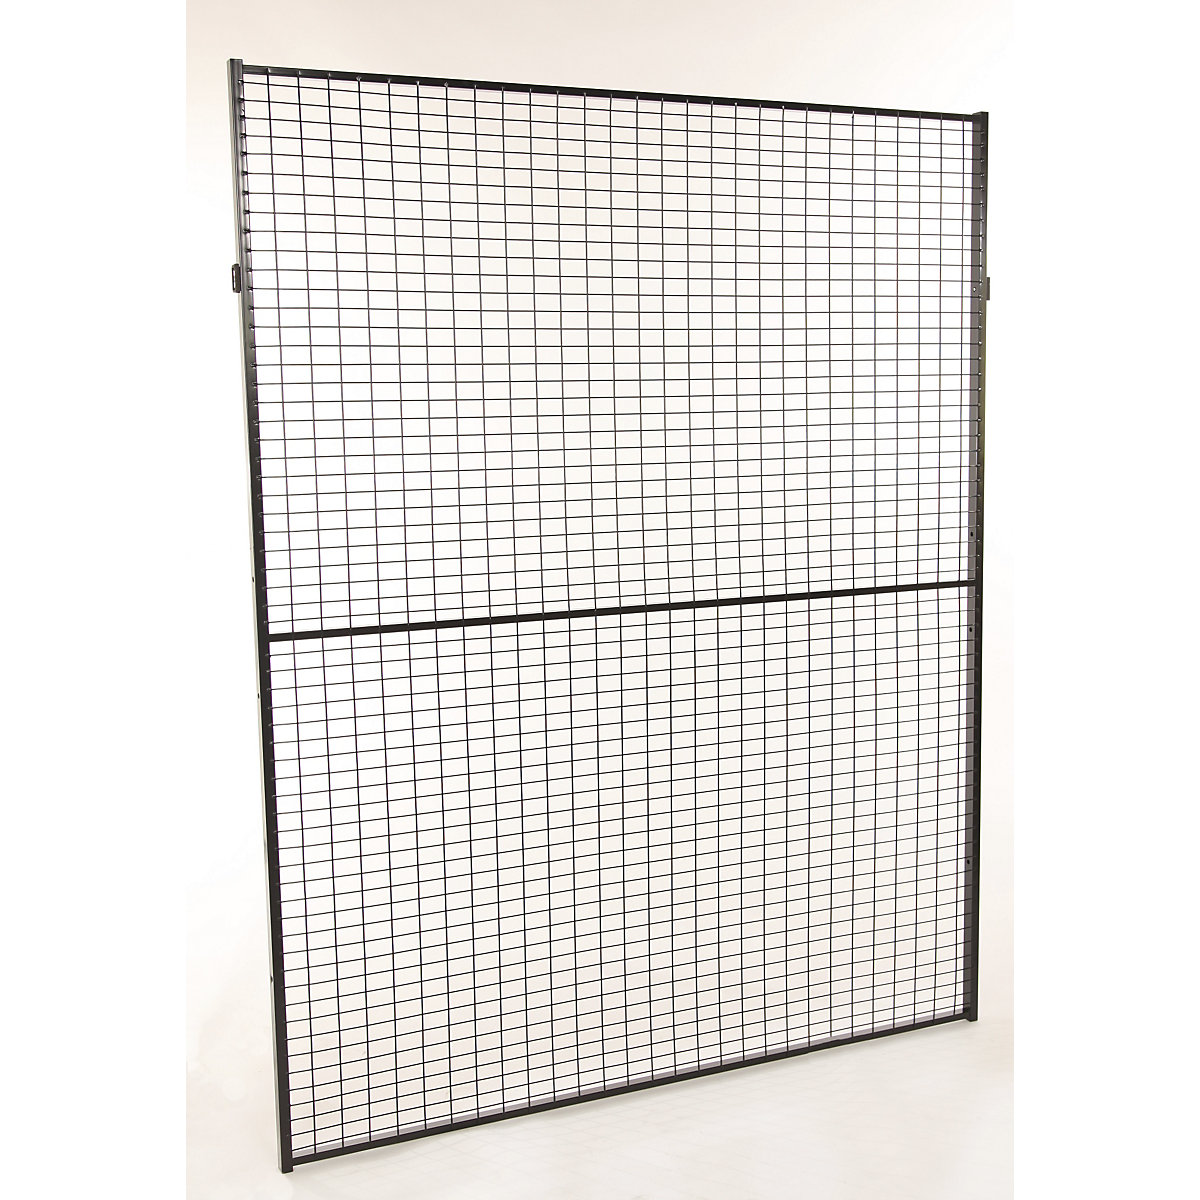 Axelent – X-GUARD CLASSIC machine protective fencing, wall section, height 1900 mm, width 1400 mm